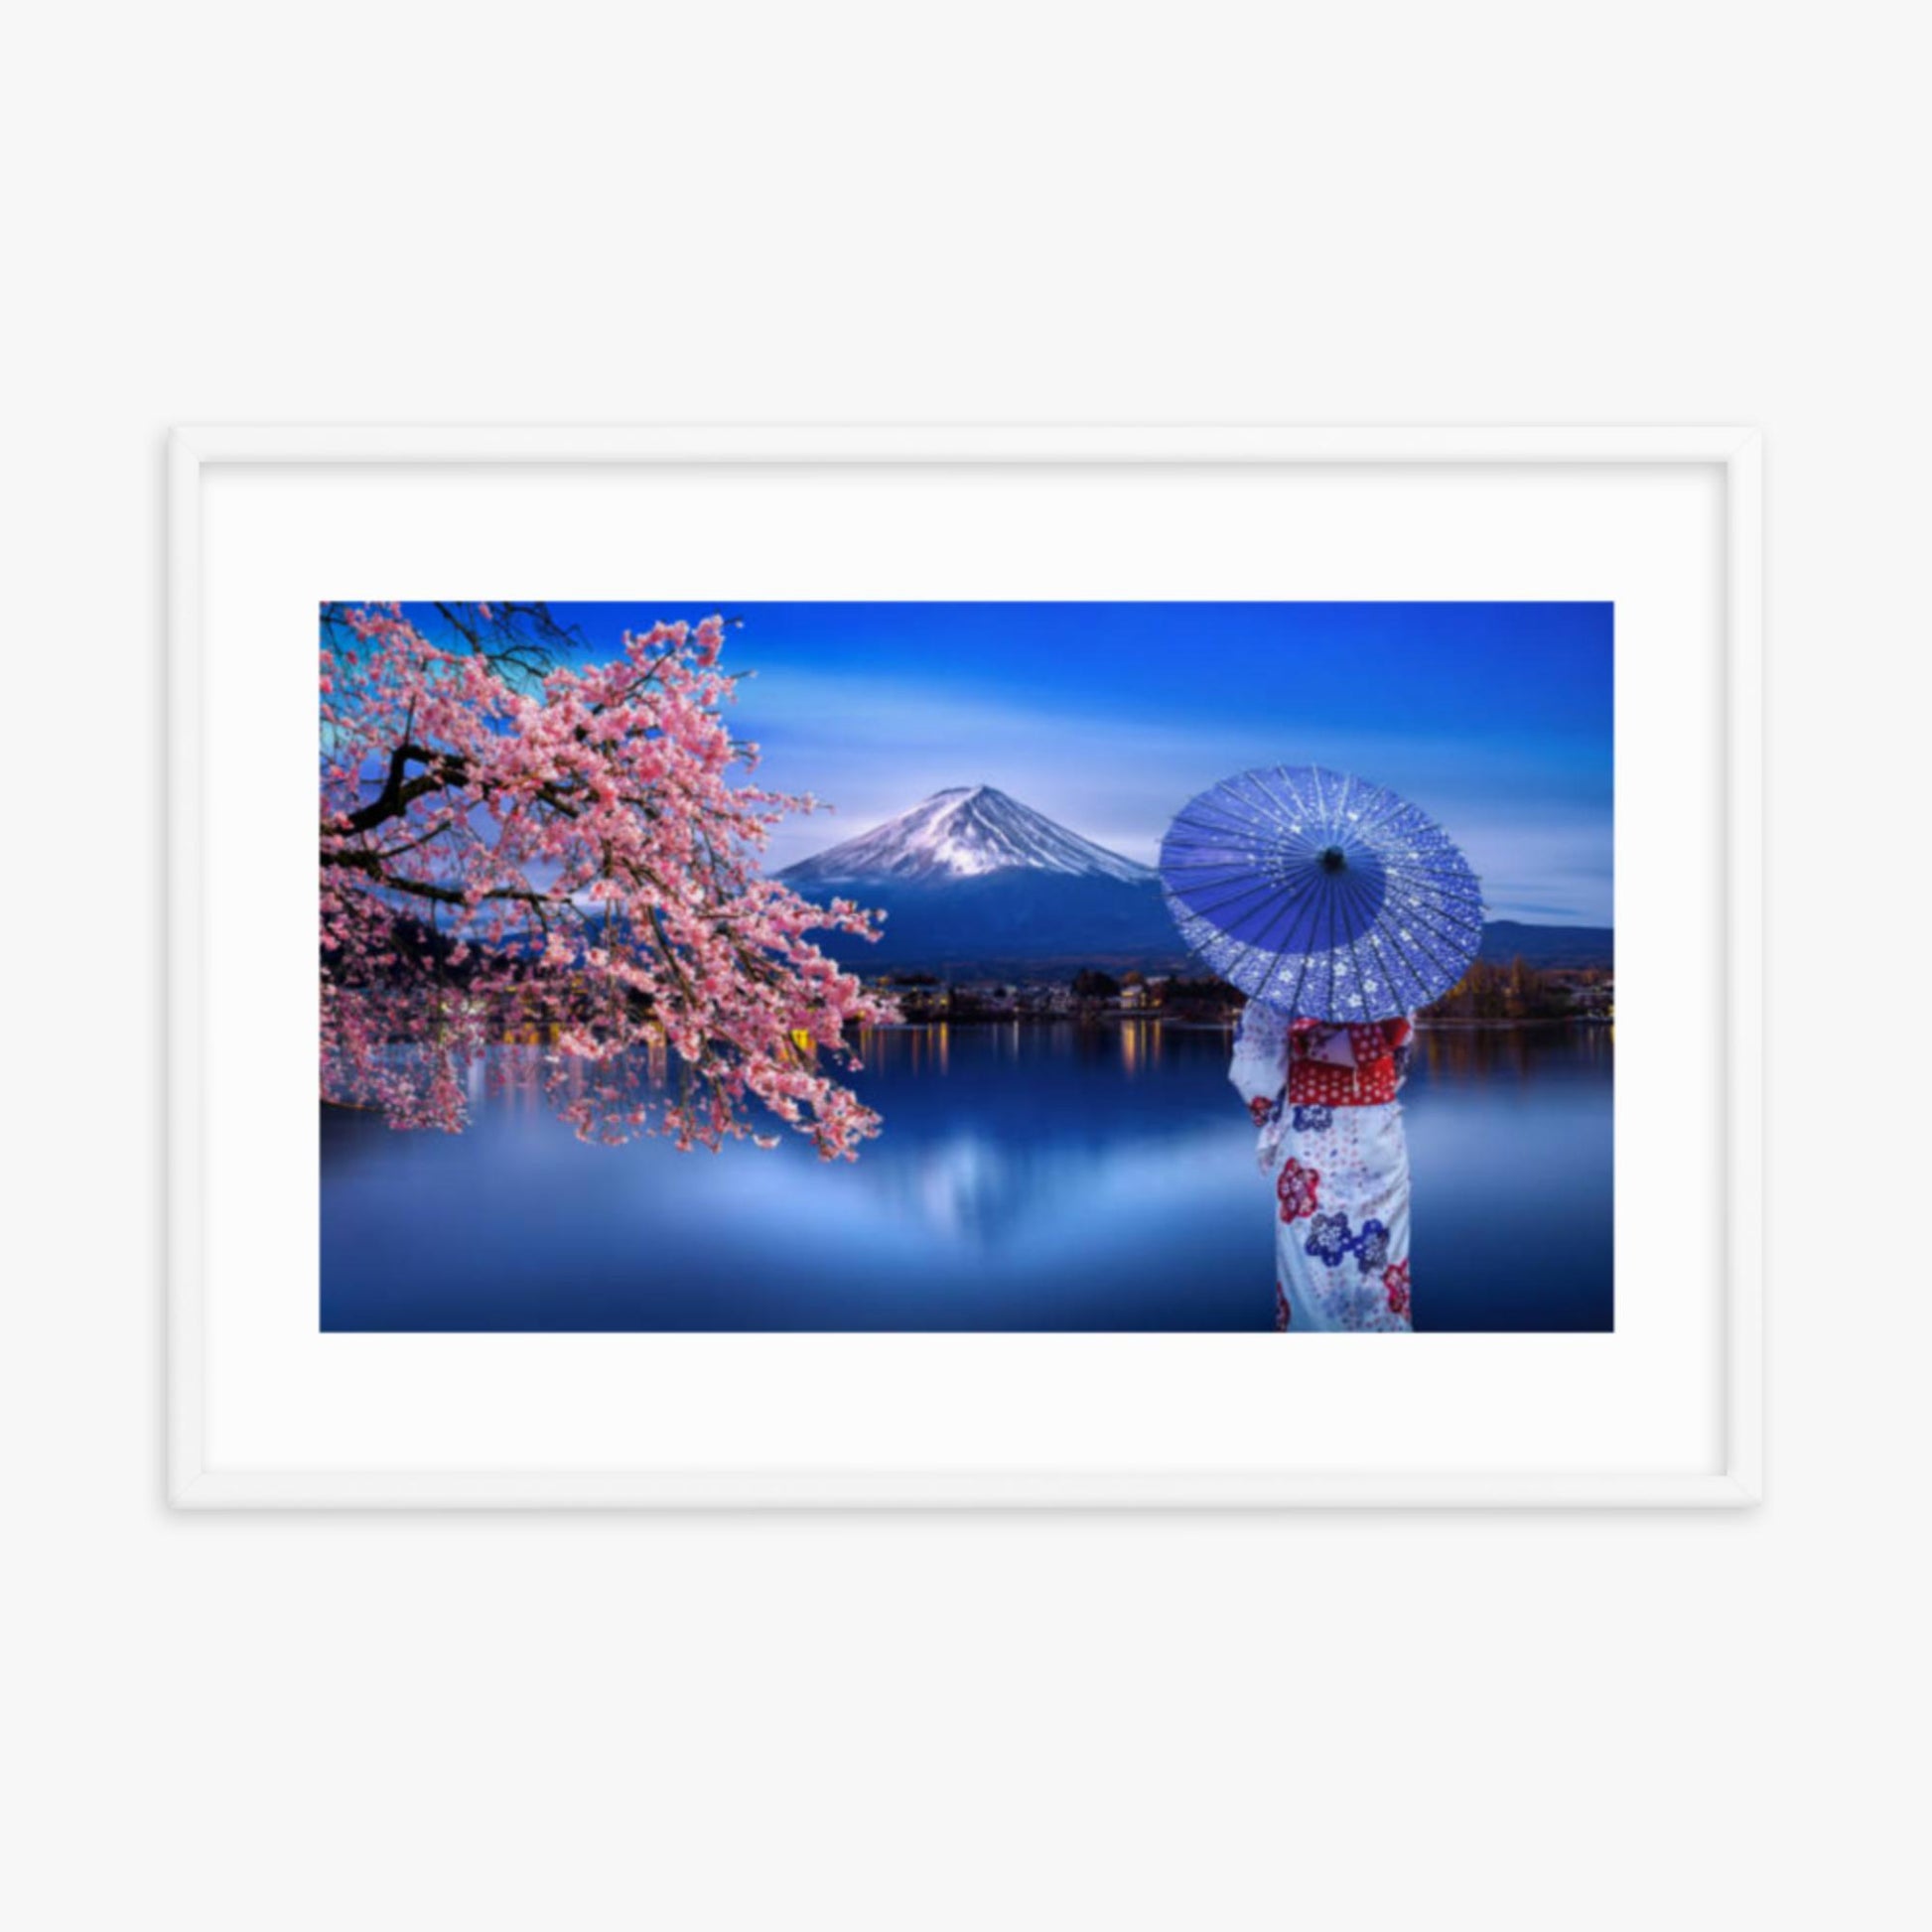 Asian woman wearing japanese traditional kimono at Fuji Mountain and cherry blossom, Kawaguchiko Lake in Japan 24x36 in Poster With White Frame